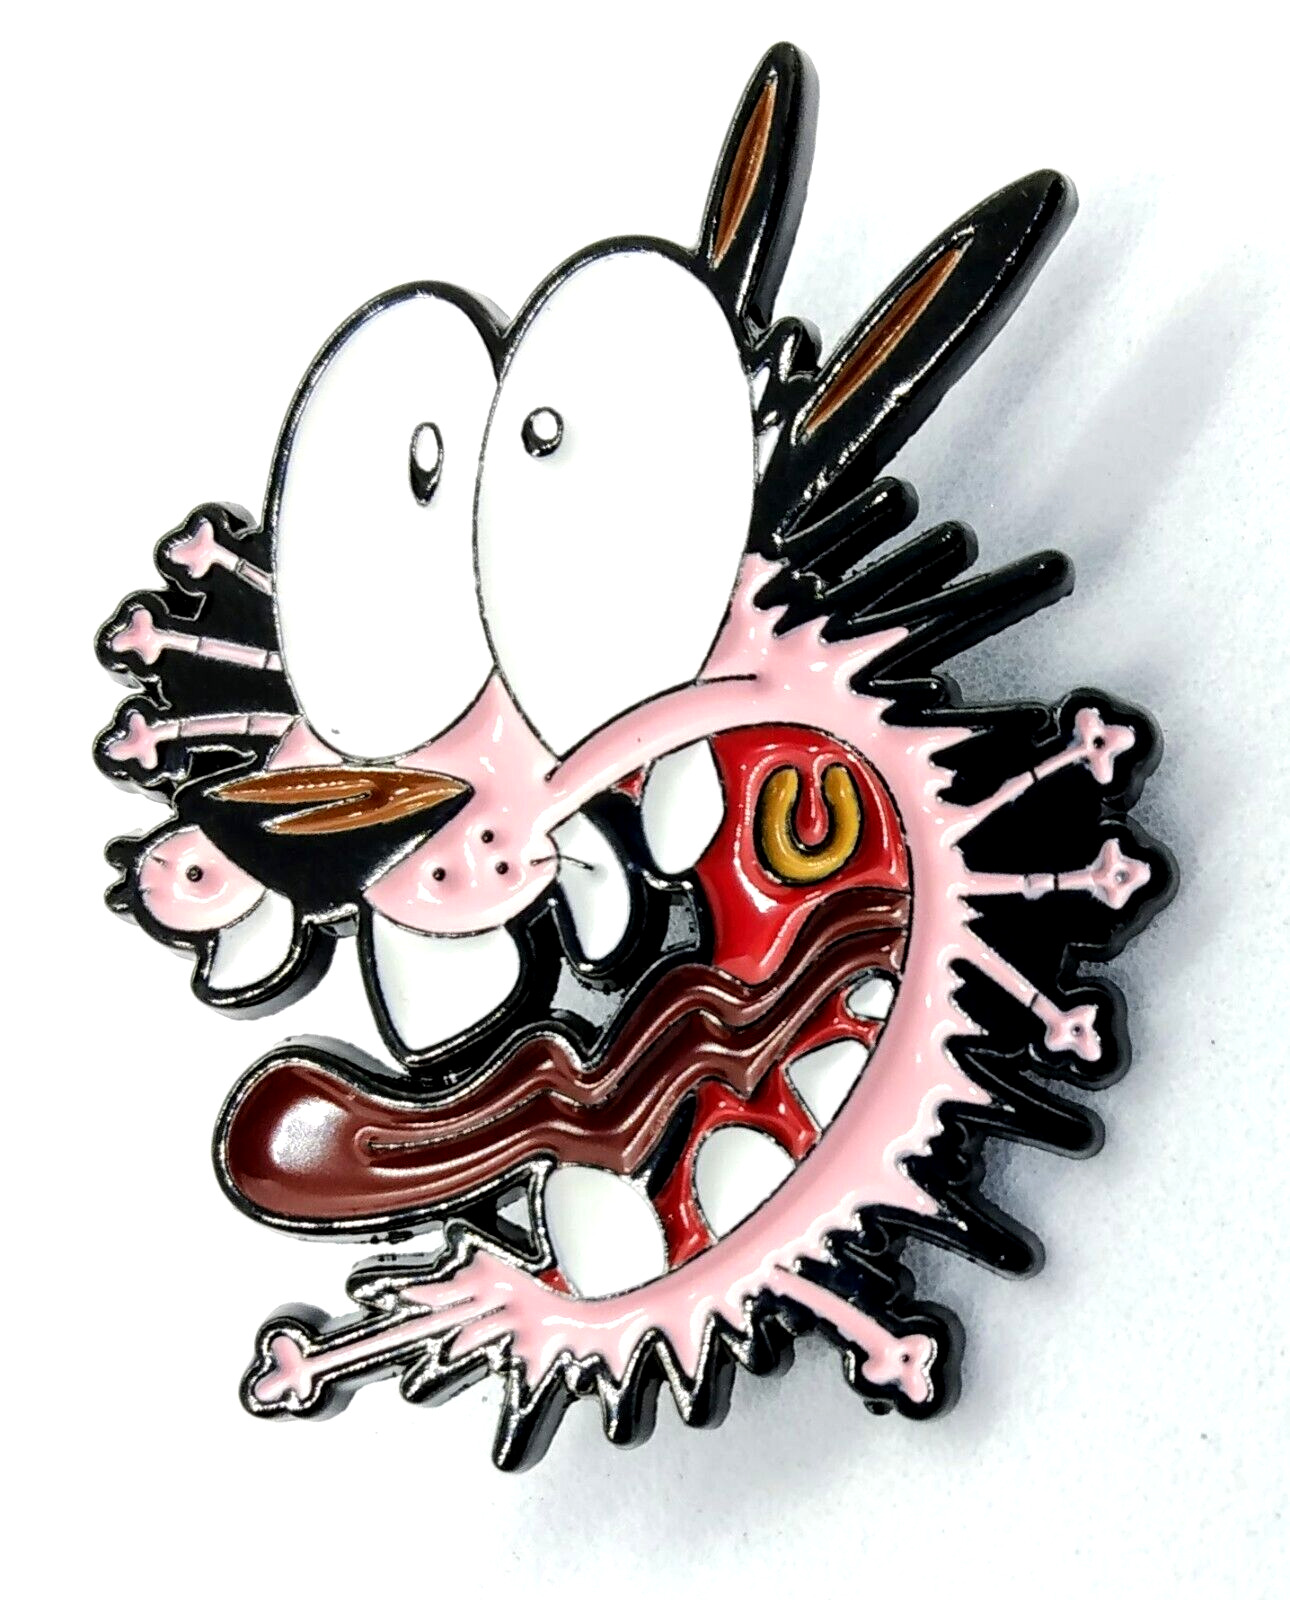 COURAGE THE COWARDLY DOG PIN Scared Funny Enamel Brooch 90s 1990s Cartoon Toon